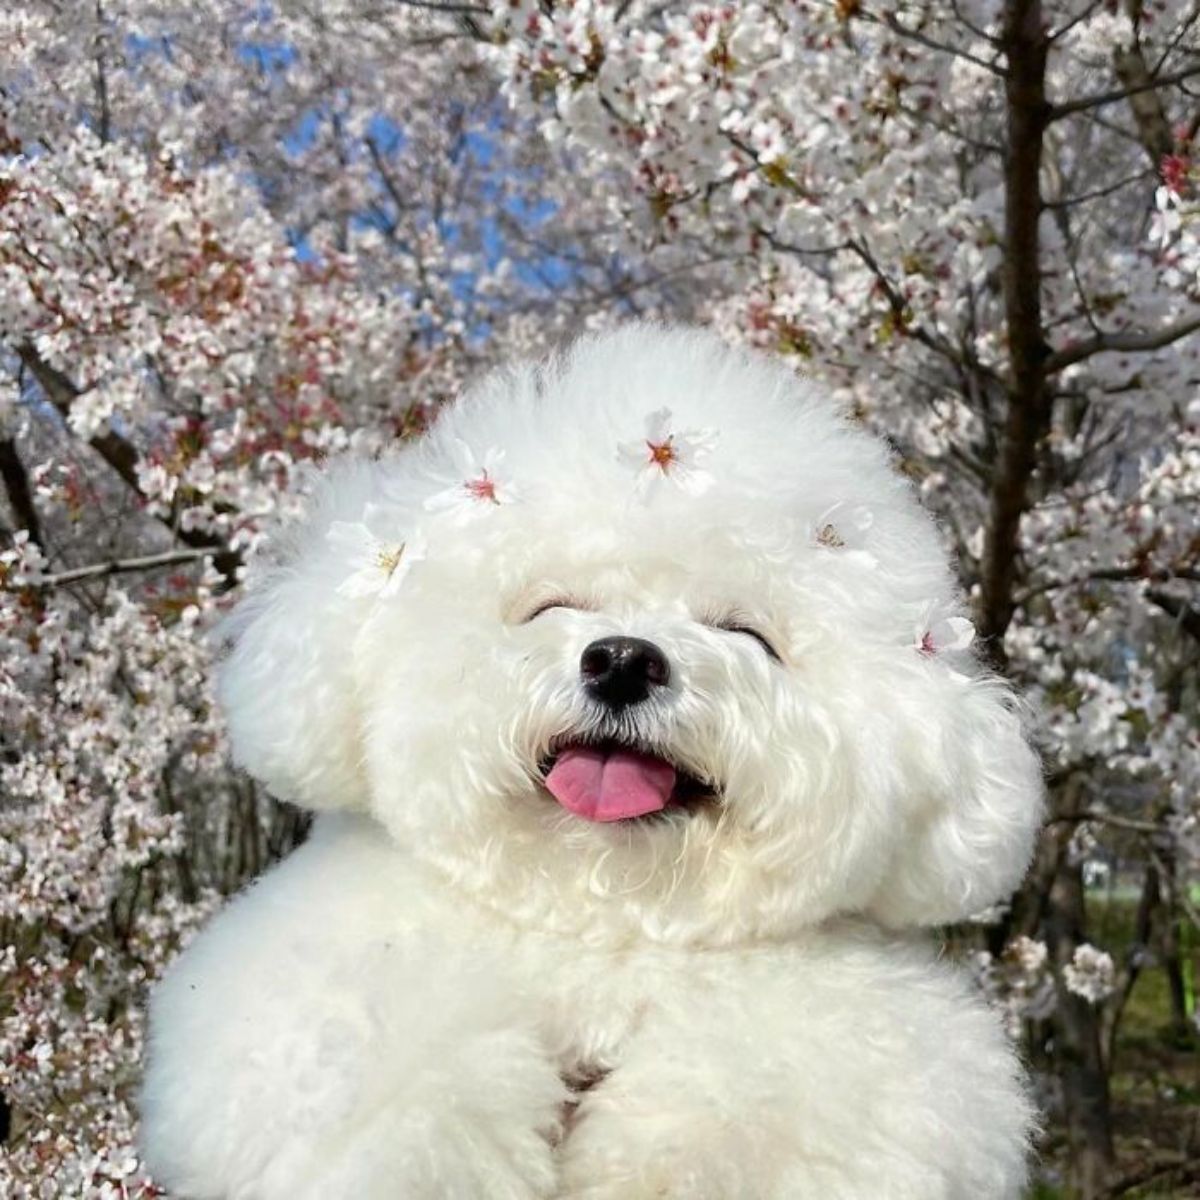 small fluffy white dog with small white and pink flowers around the face with a backgroundo f blossoming pink and white flowers